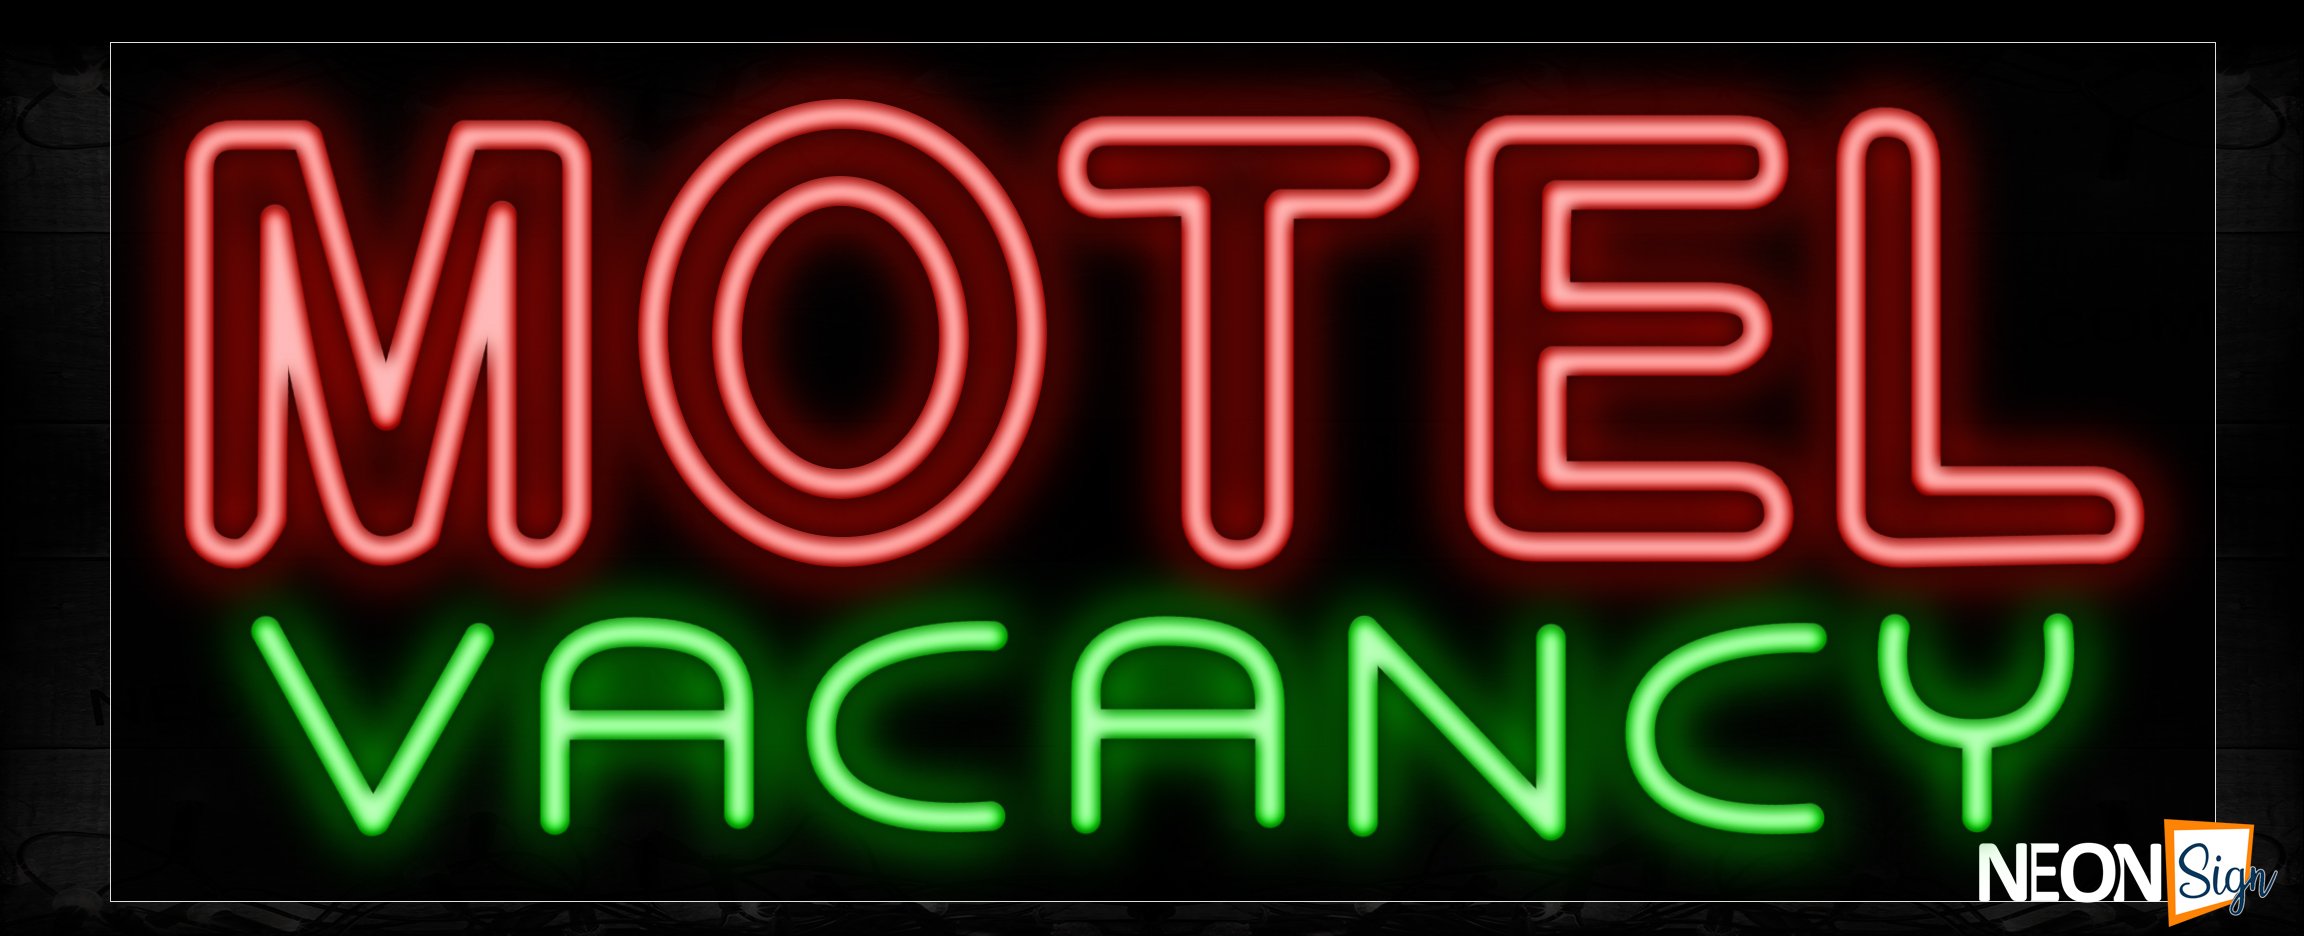 Image of 11443 Double stroke Motel Vacancy Neon Sign_13x32 Black Backing